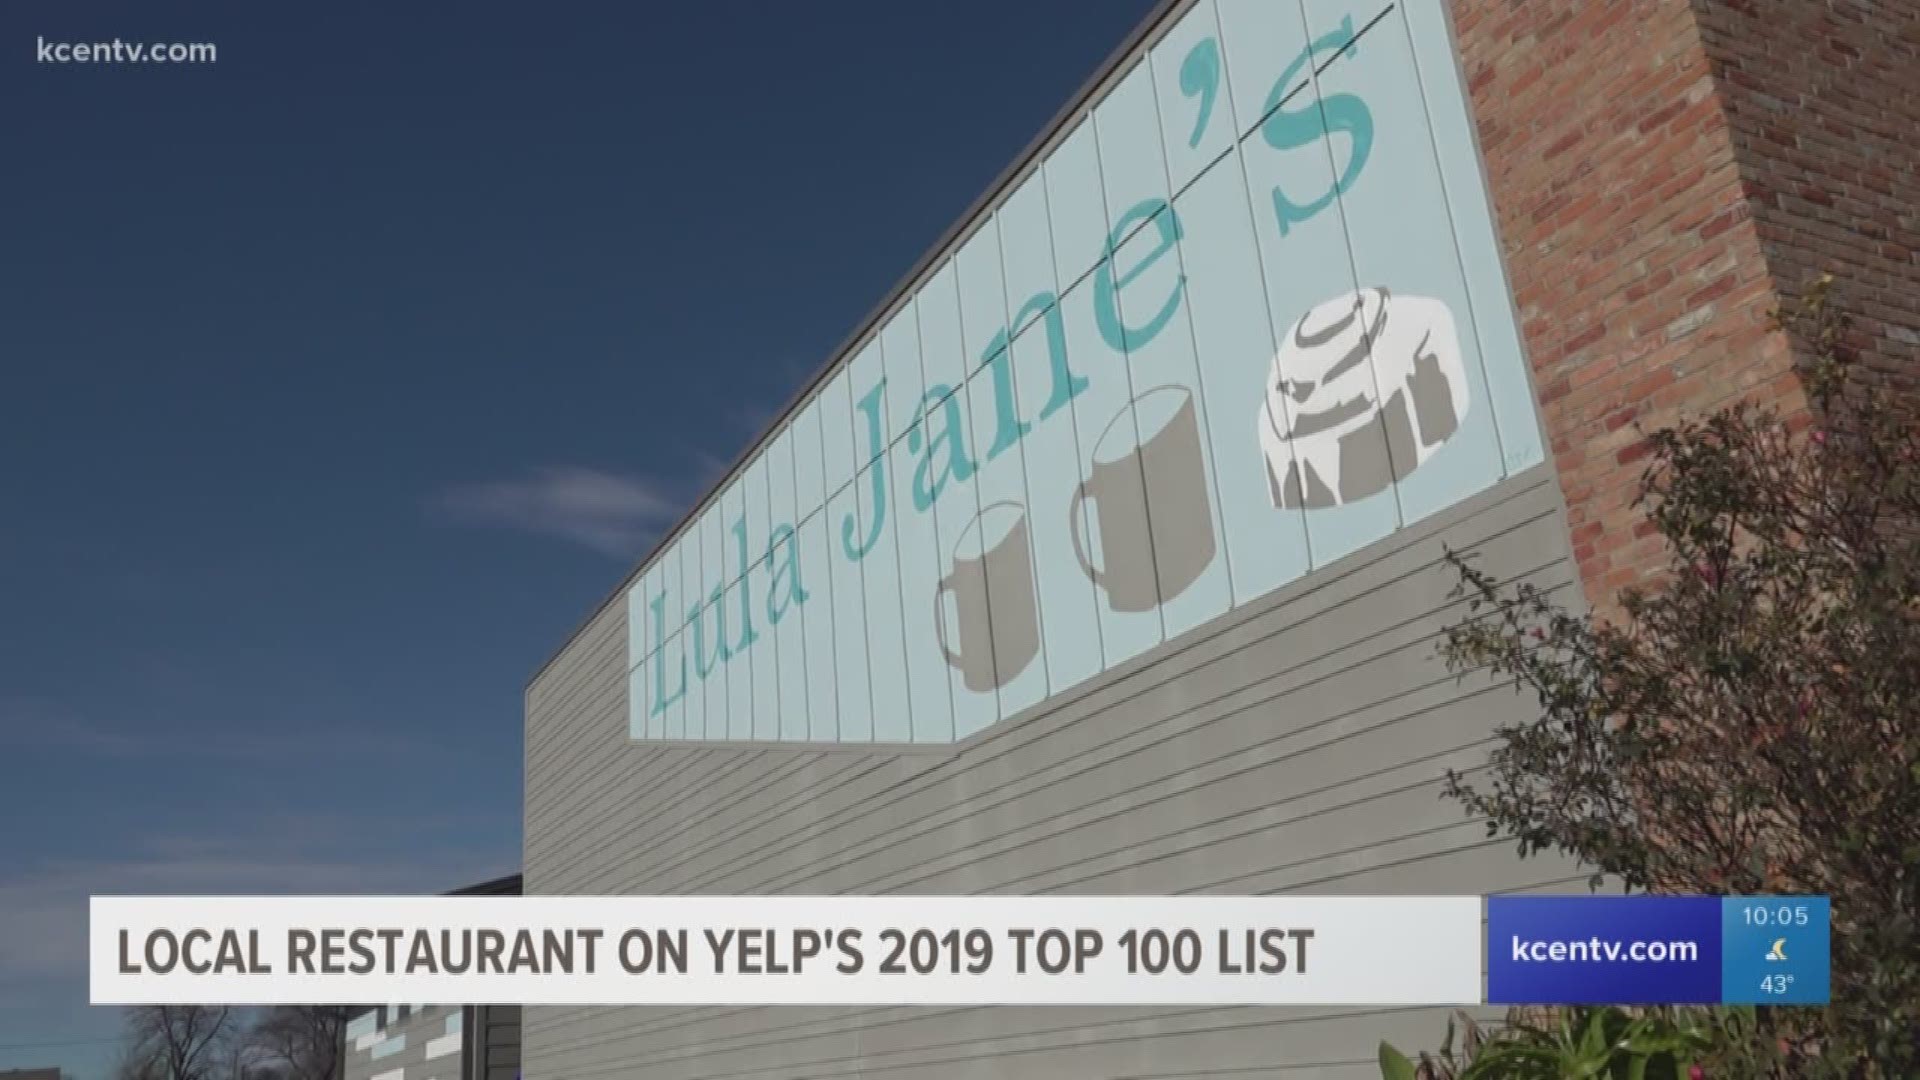 Lula Jane's in Waco was one of 13 Texas restaurants that made Yelp's Top 100 Places to Eat in the U.S. 2019 list.